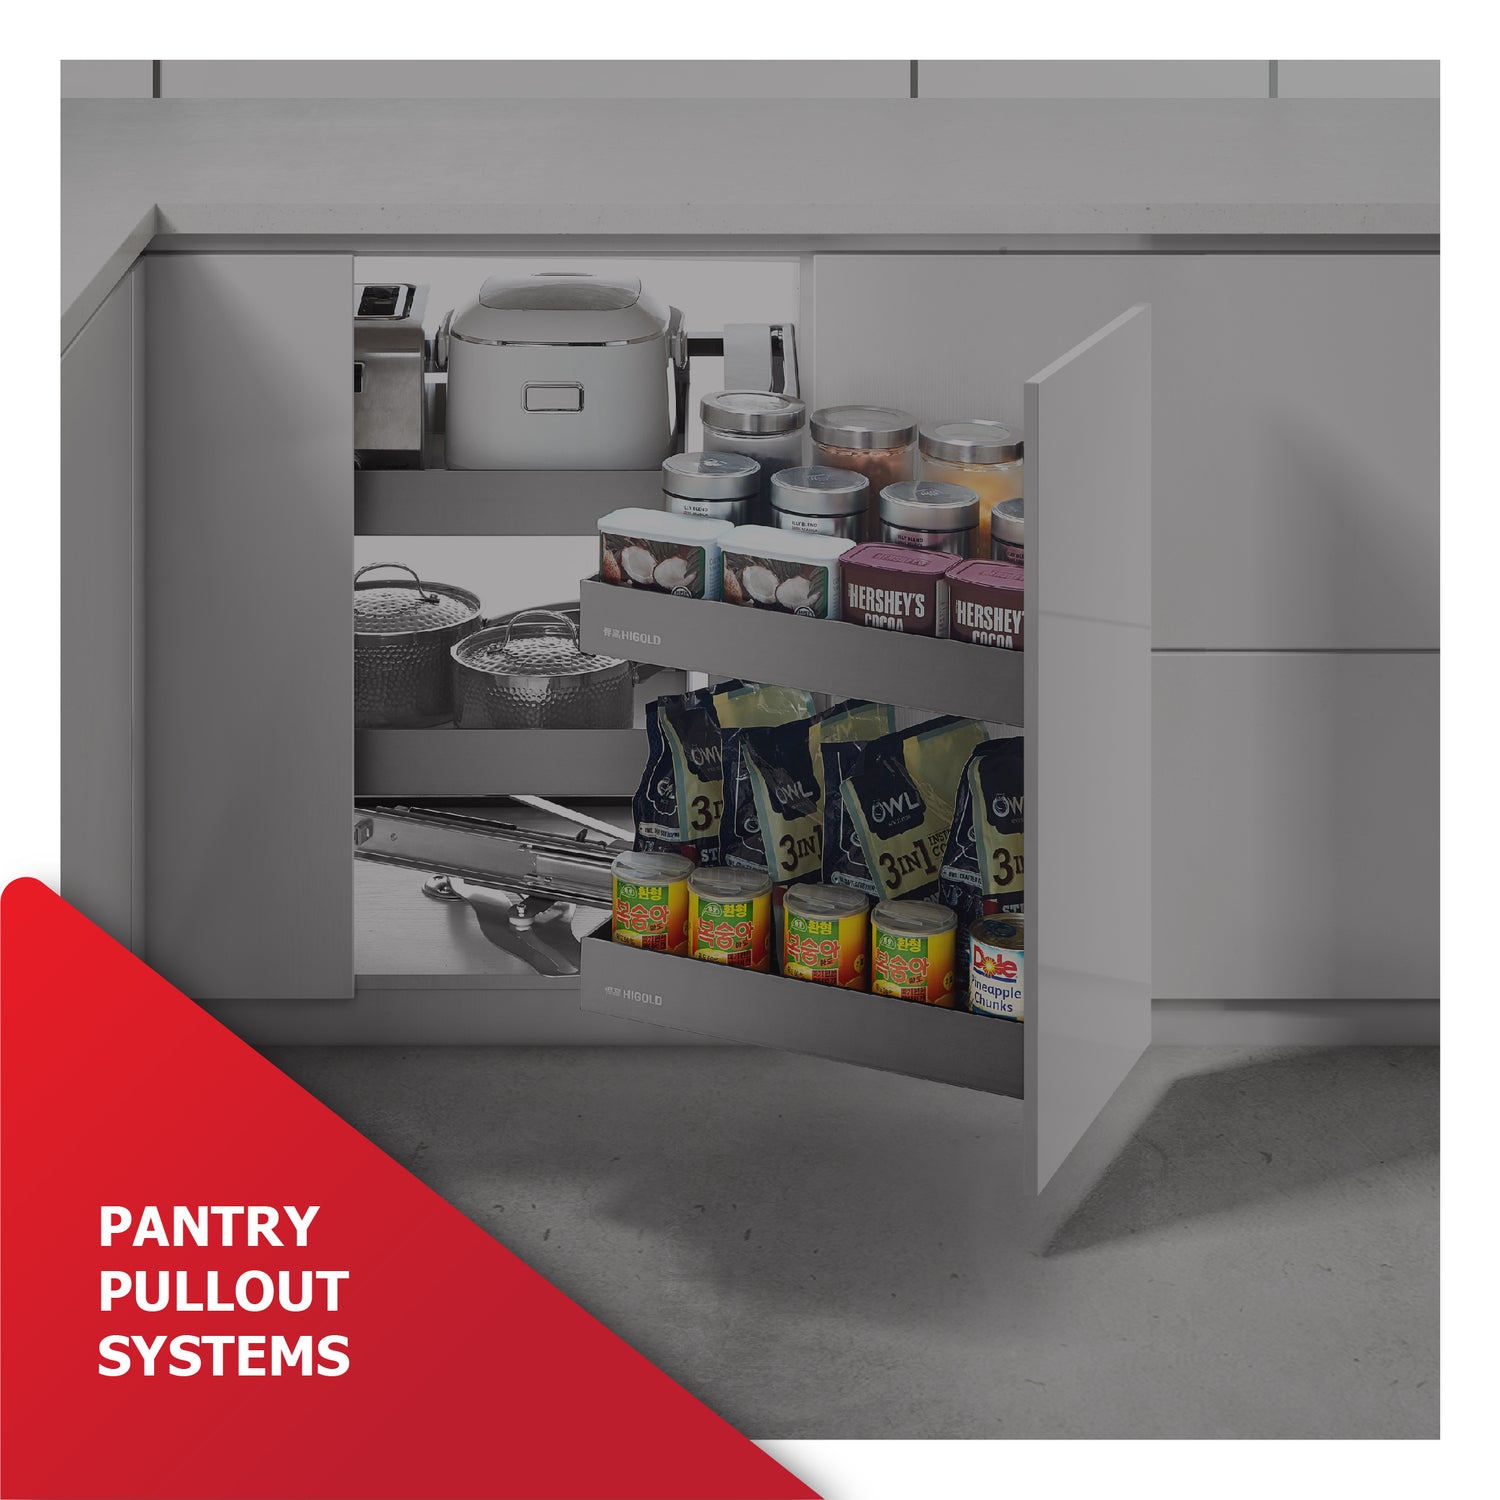 Efficient and space-saving pullout systems by M. M. Noorbhoy & Co - High-quality storage solutions for your convenience.